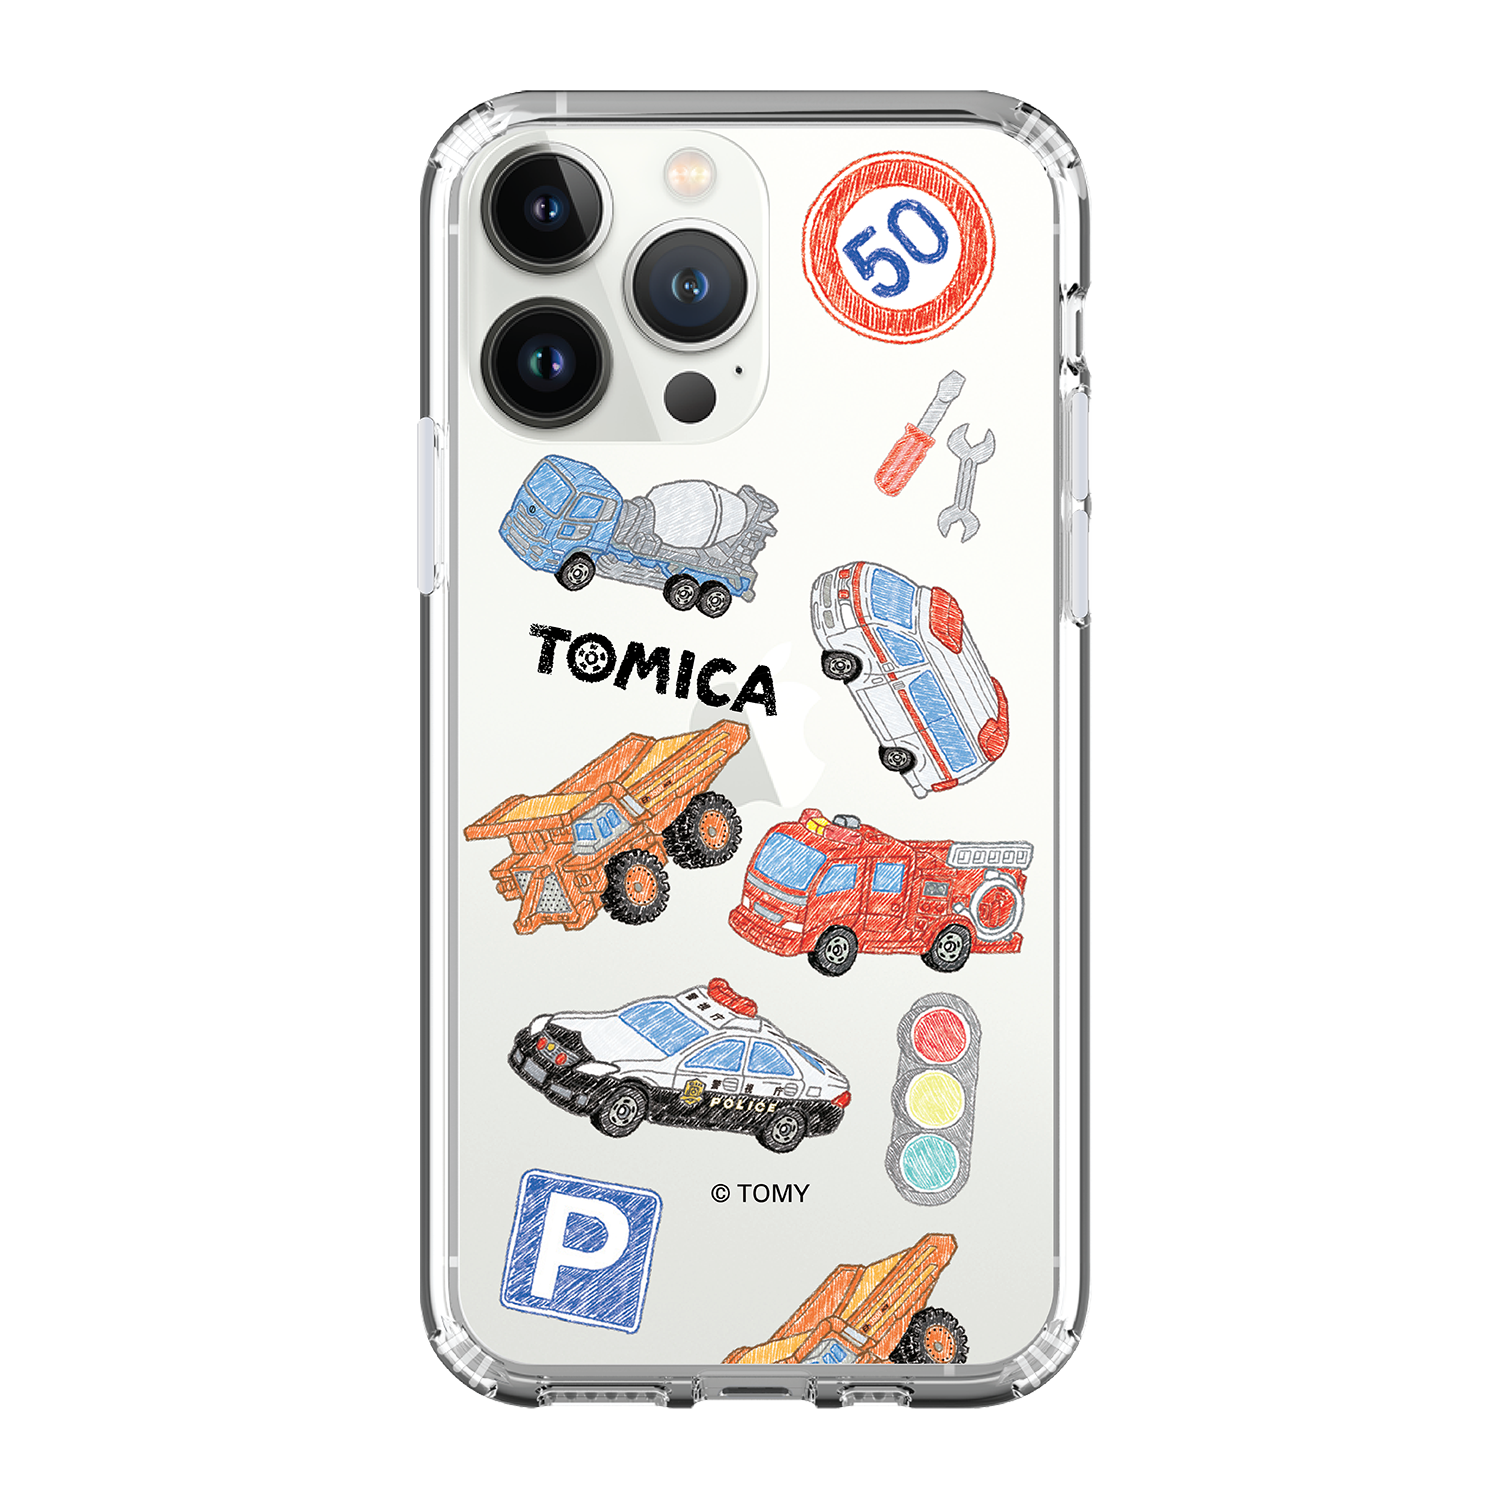 TOMICA Clear Case / iPhone Case / Android Case / Samsung Case 正版授權 專利設計 全包邊氣囊防撞手機殼 (TOMICA07)